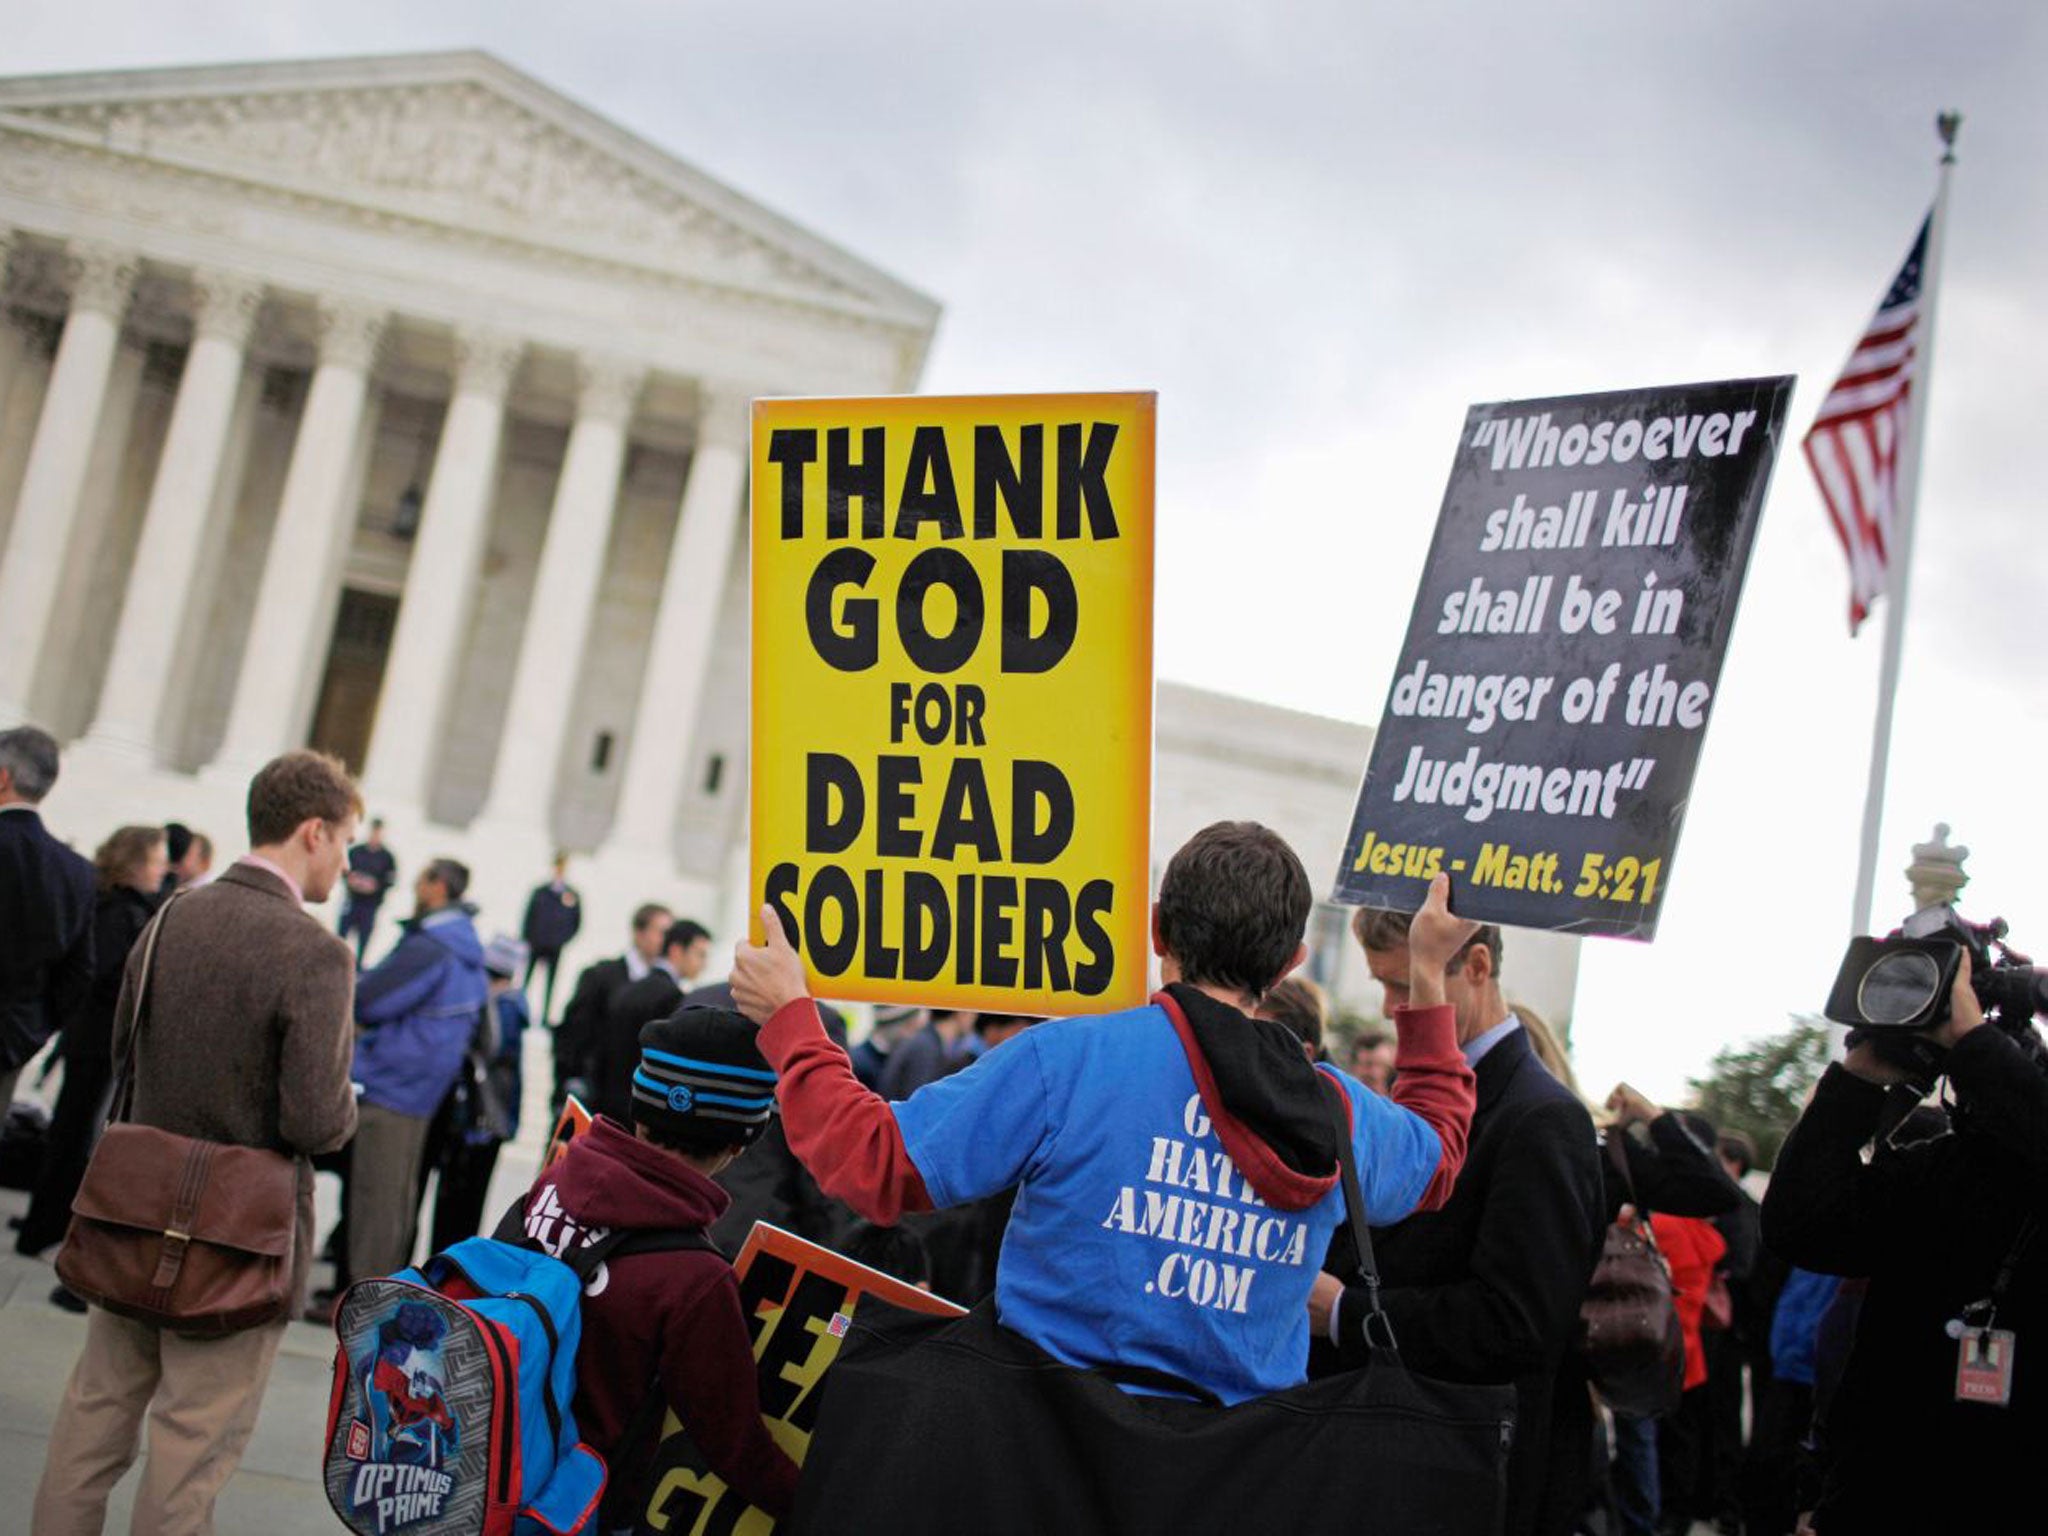 The Westboro Baptist Church was known for picketing the funerals of gay people and soldiers